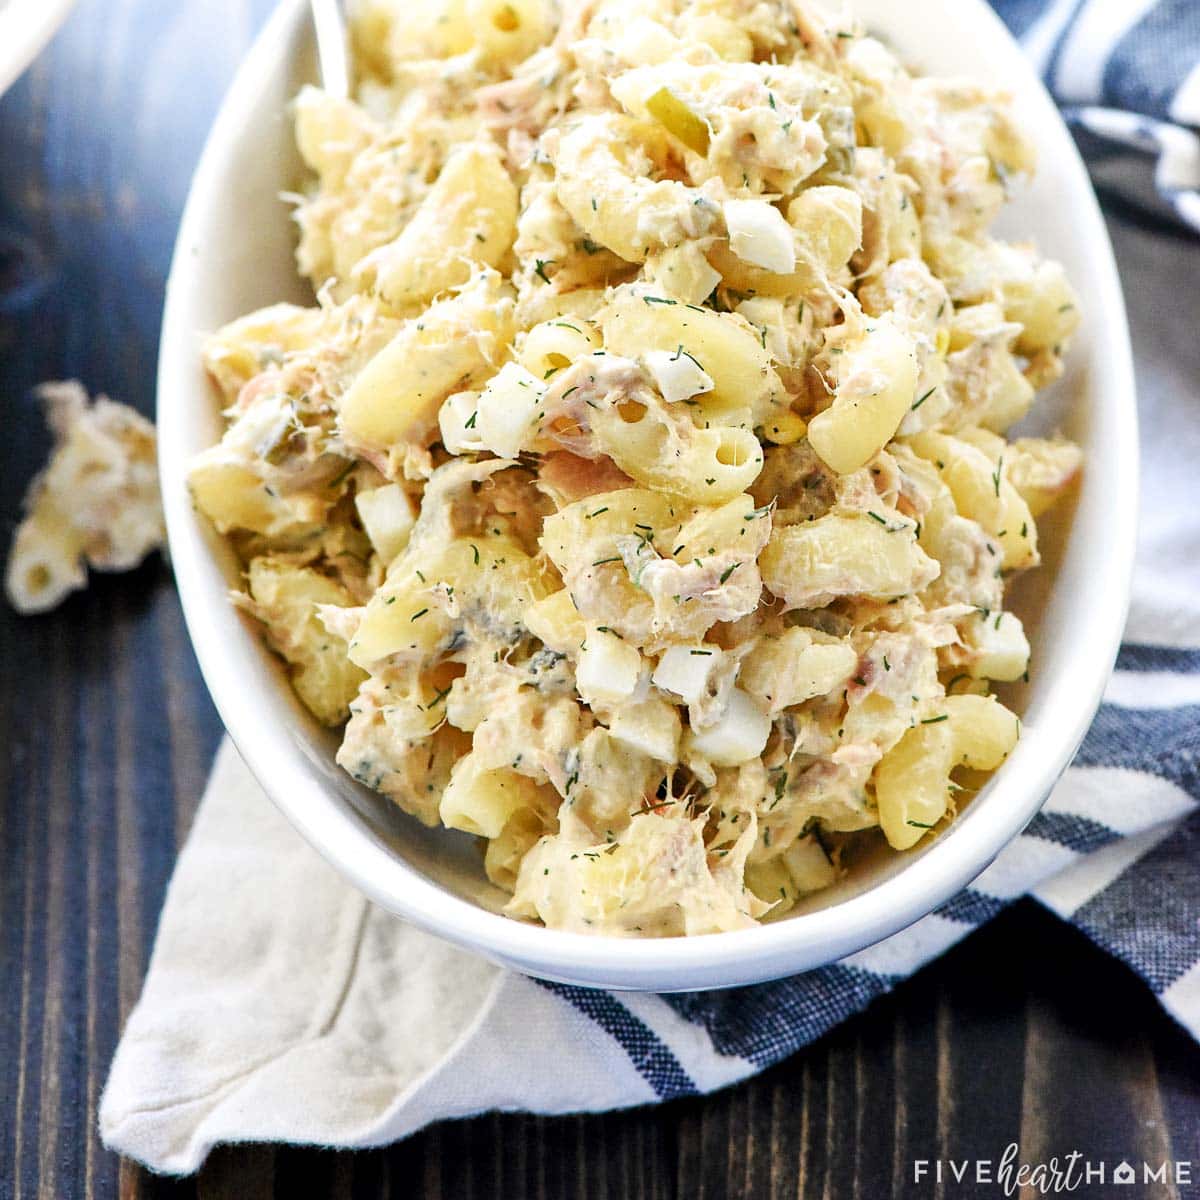 https://www.fivehearthome.com/wp-content/uploads/2023/04/Tuna-Pasta-Salad-Recipe-by-Five-Heart-Home_1200pxSquareFeatured-1.jpg